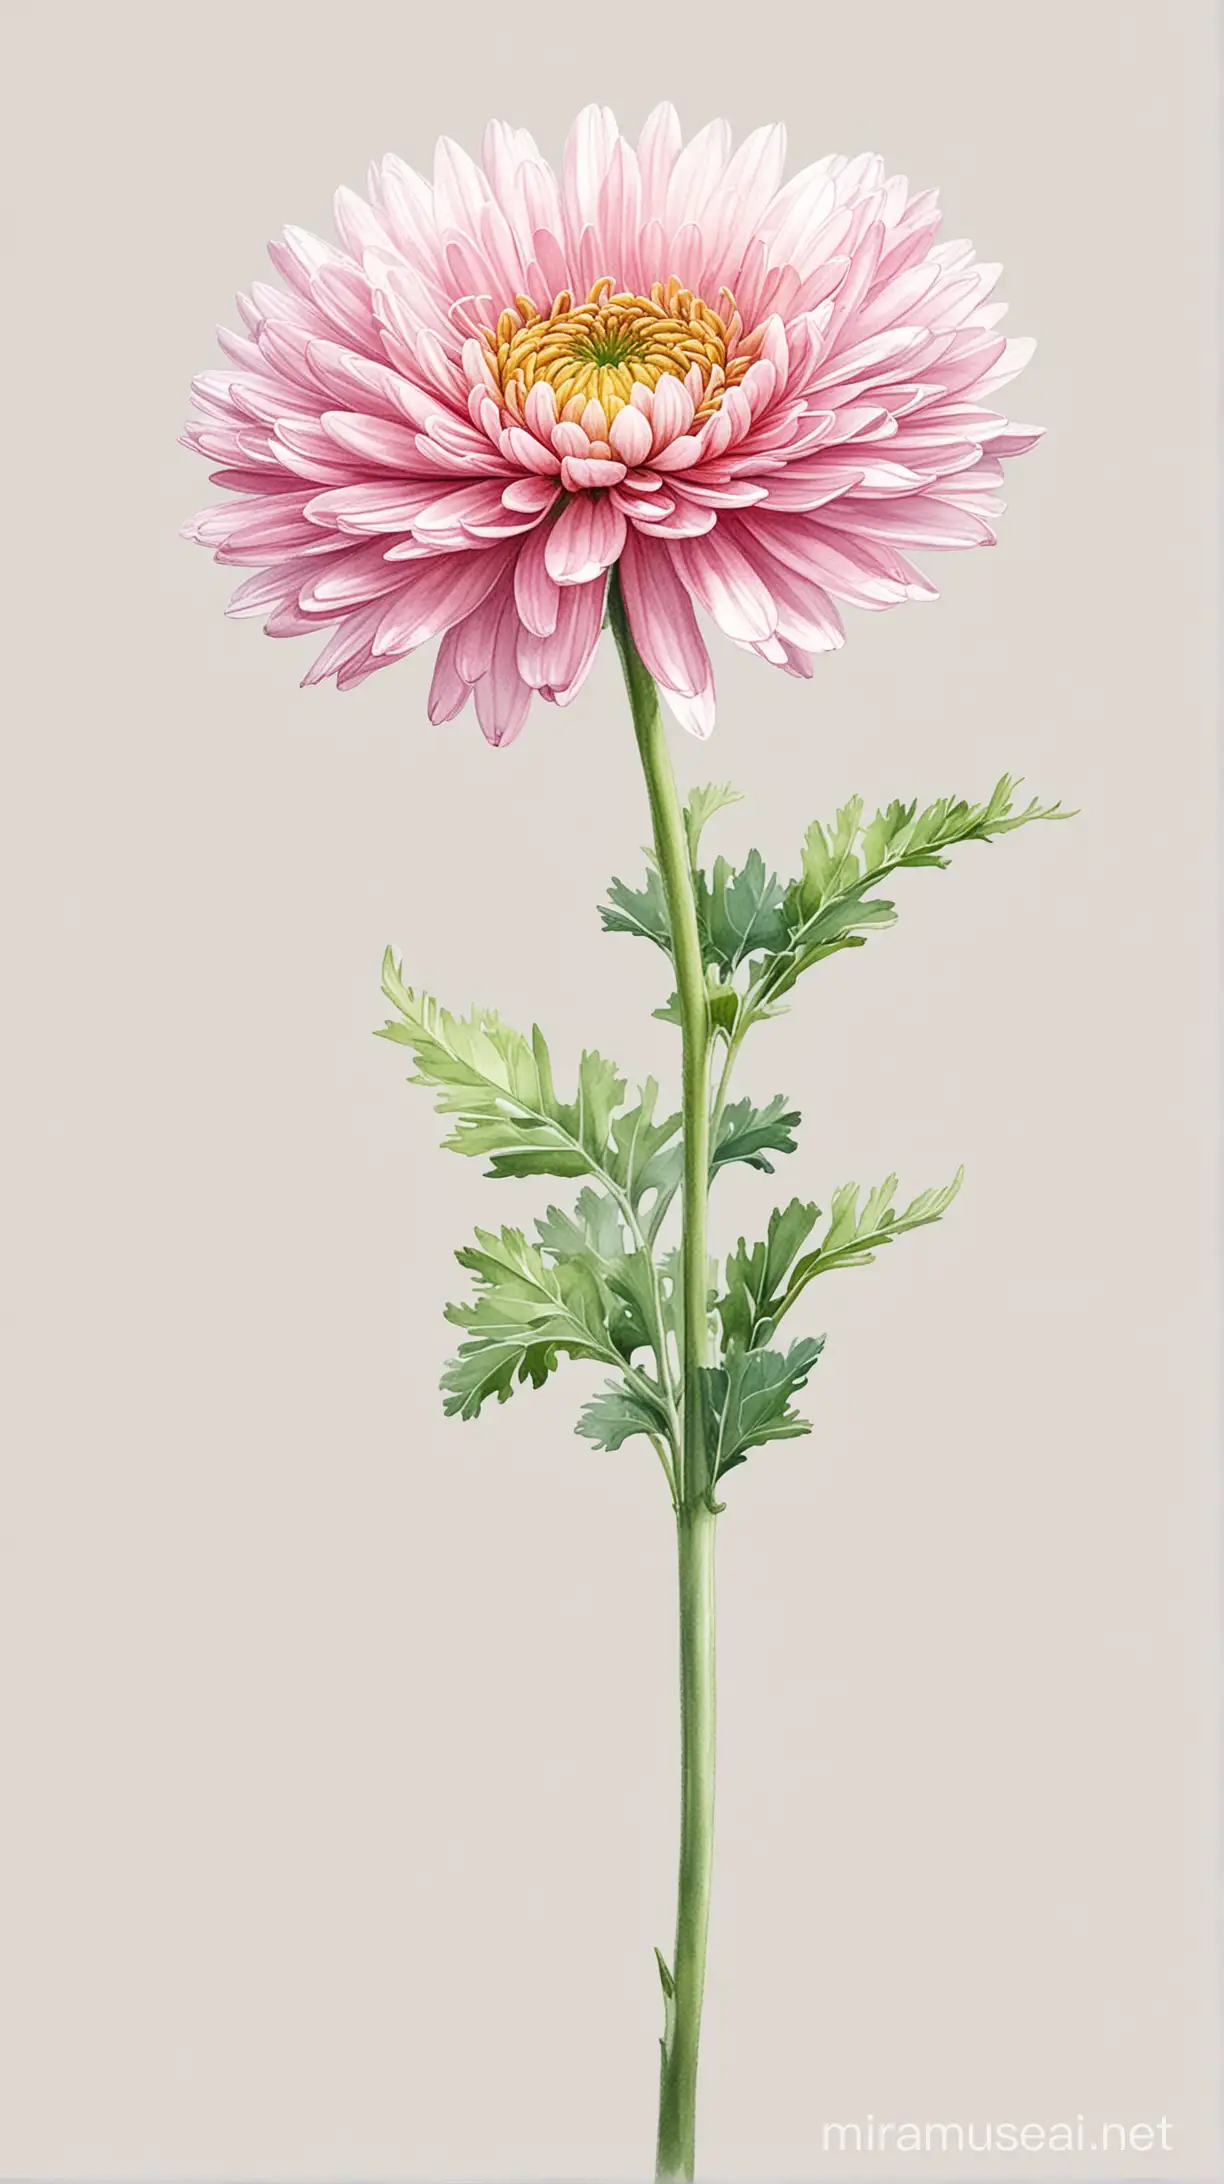 Vibrant Pink Chrysanthemum Flower in Watercolor Style on White Background